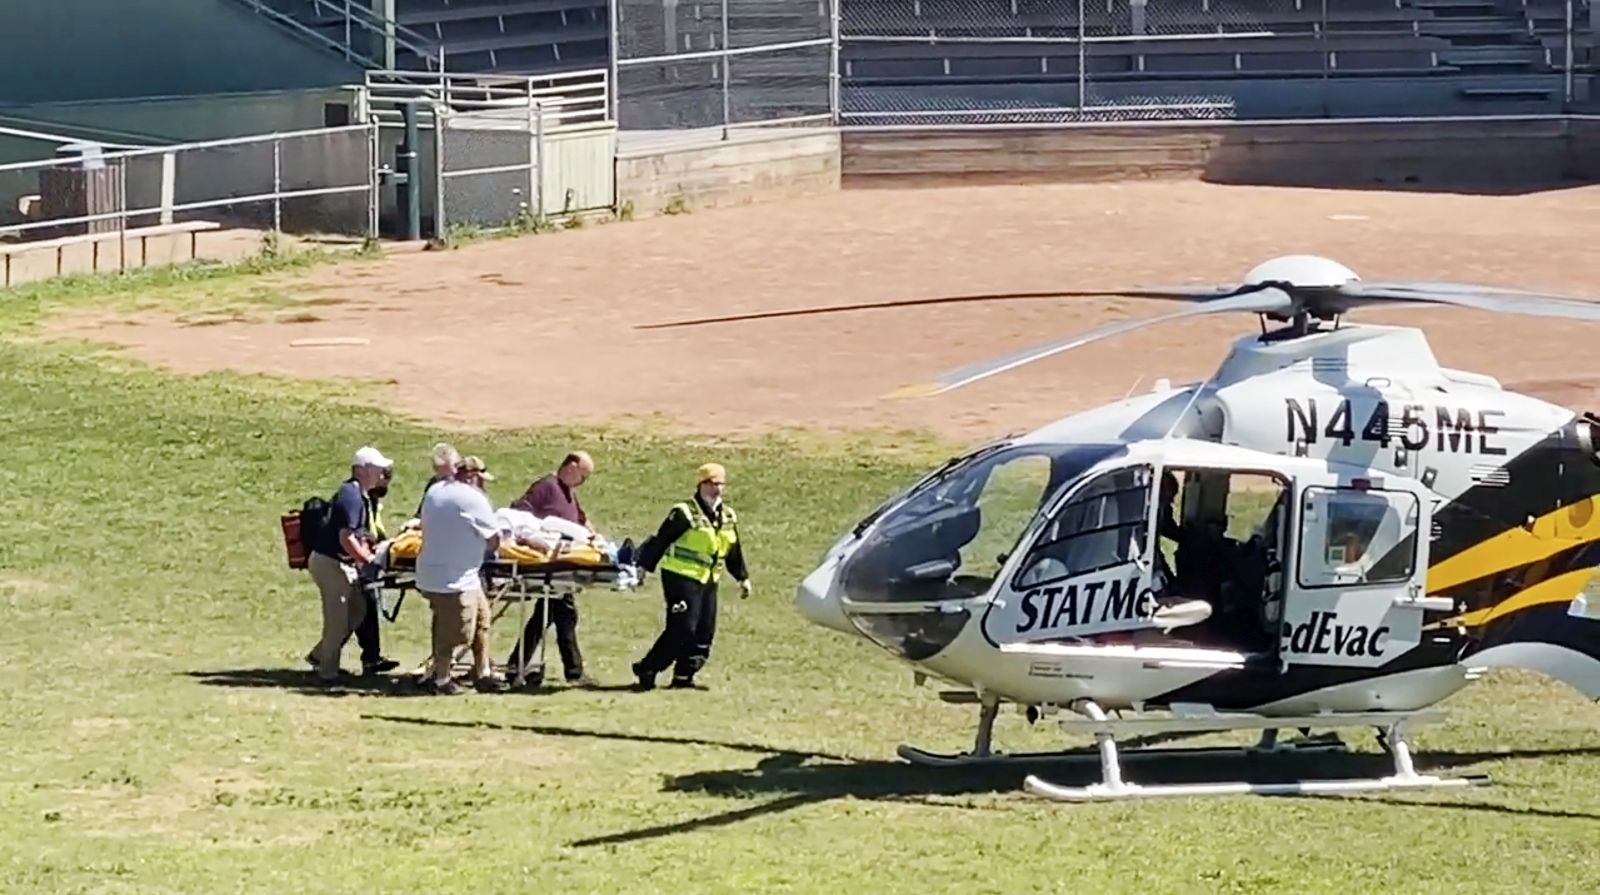 epa10117604 Frame grab from a video released via Twitter user @HoratioGates3 and used with permission, showing Salman Rushdie being loaded into a MedEvac helicopter after he and an interviewer were attacked while on stage at an event in Chautauqua, New York State, USA, 12 August 2022. The suspect was taken into custody, New York State police said. Rushdie, who was reportedly stabbed in the neck, was transported to a hospital.  EPA/@HoratioGates3 EDITORIAL USE ONLY, NO SALES HANDOUT EDITORIAL USE ONLY/NO SALES